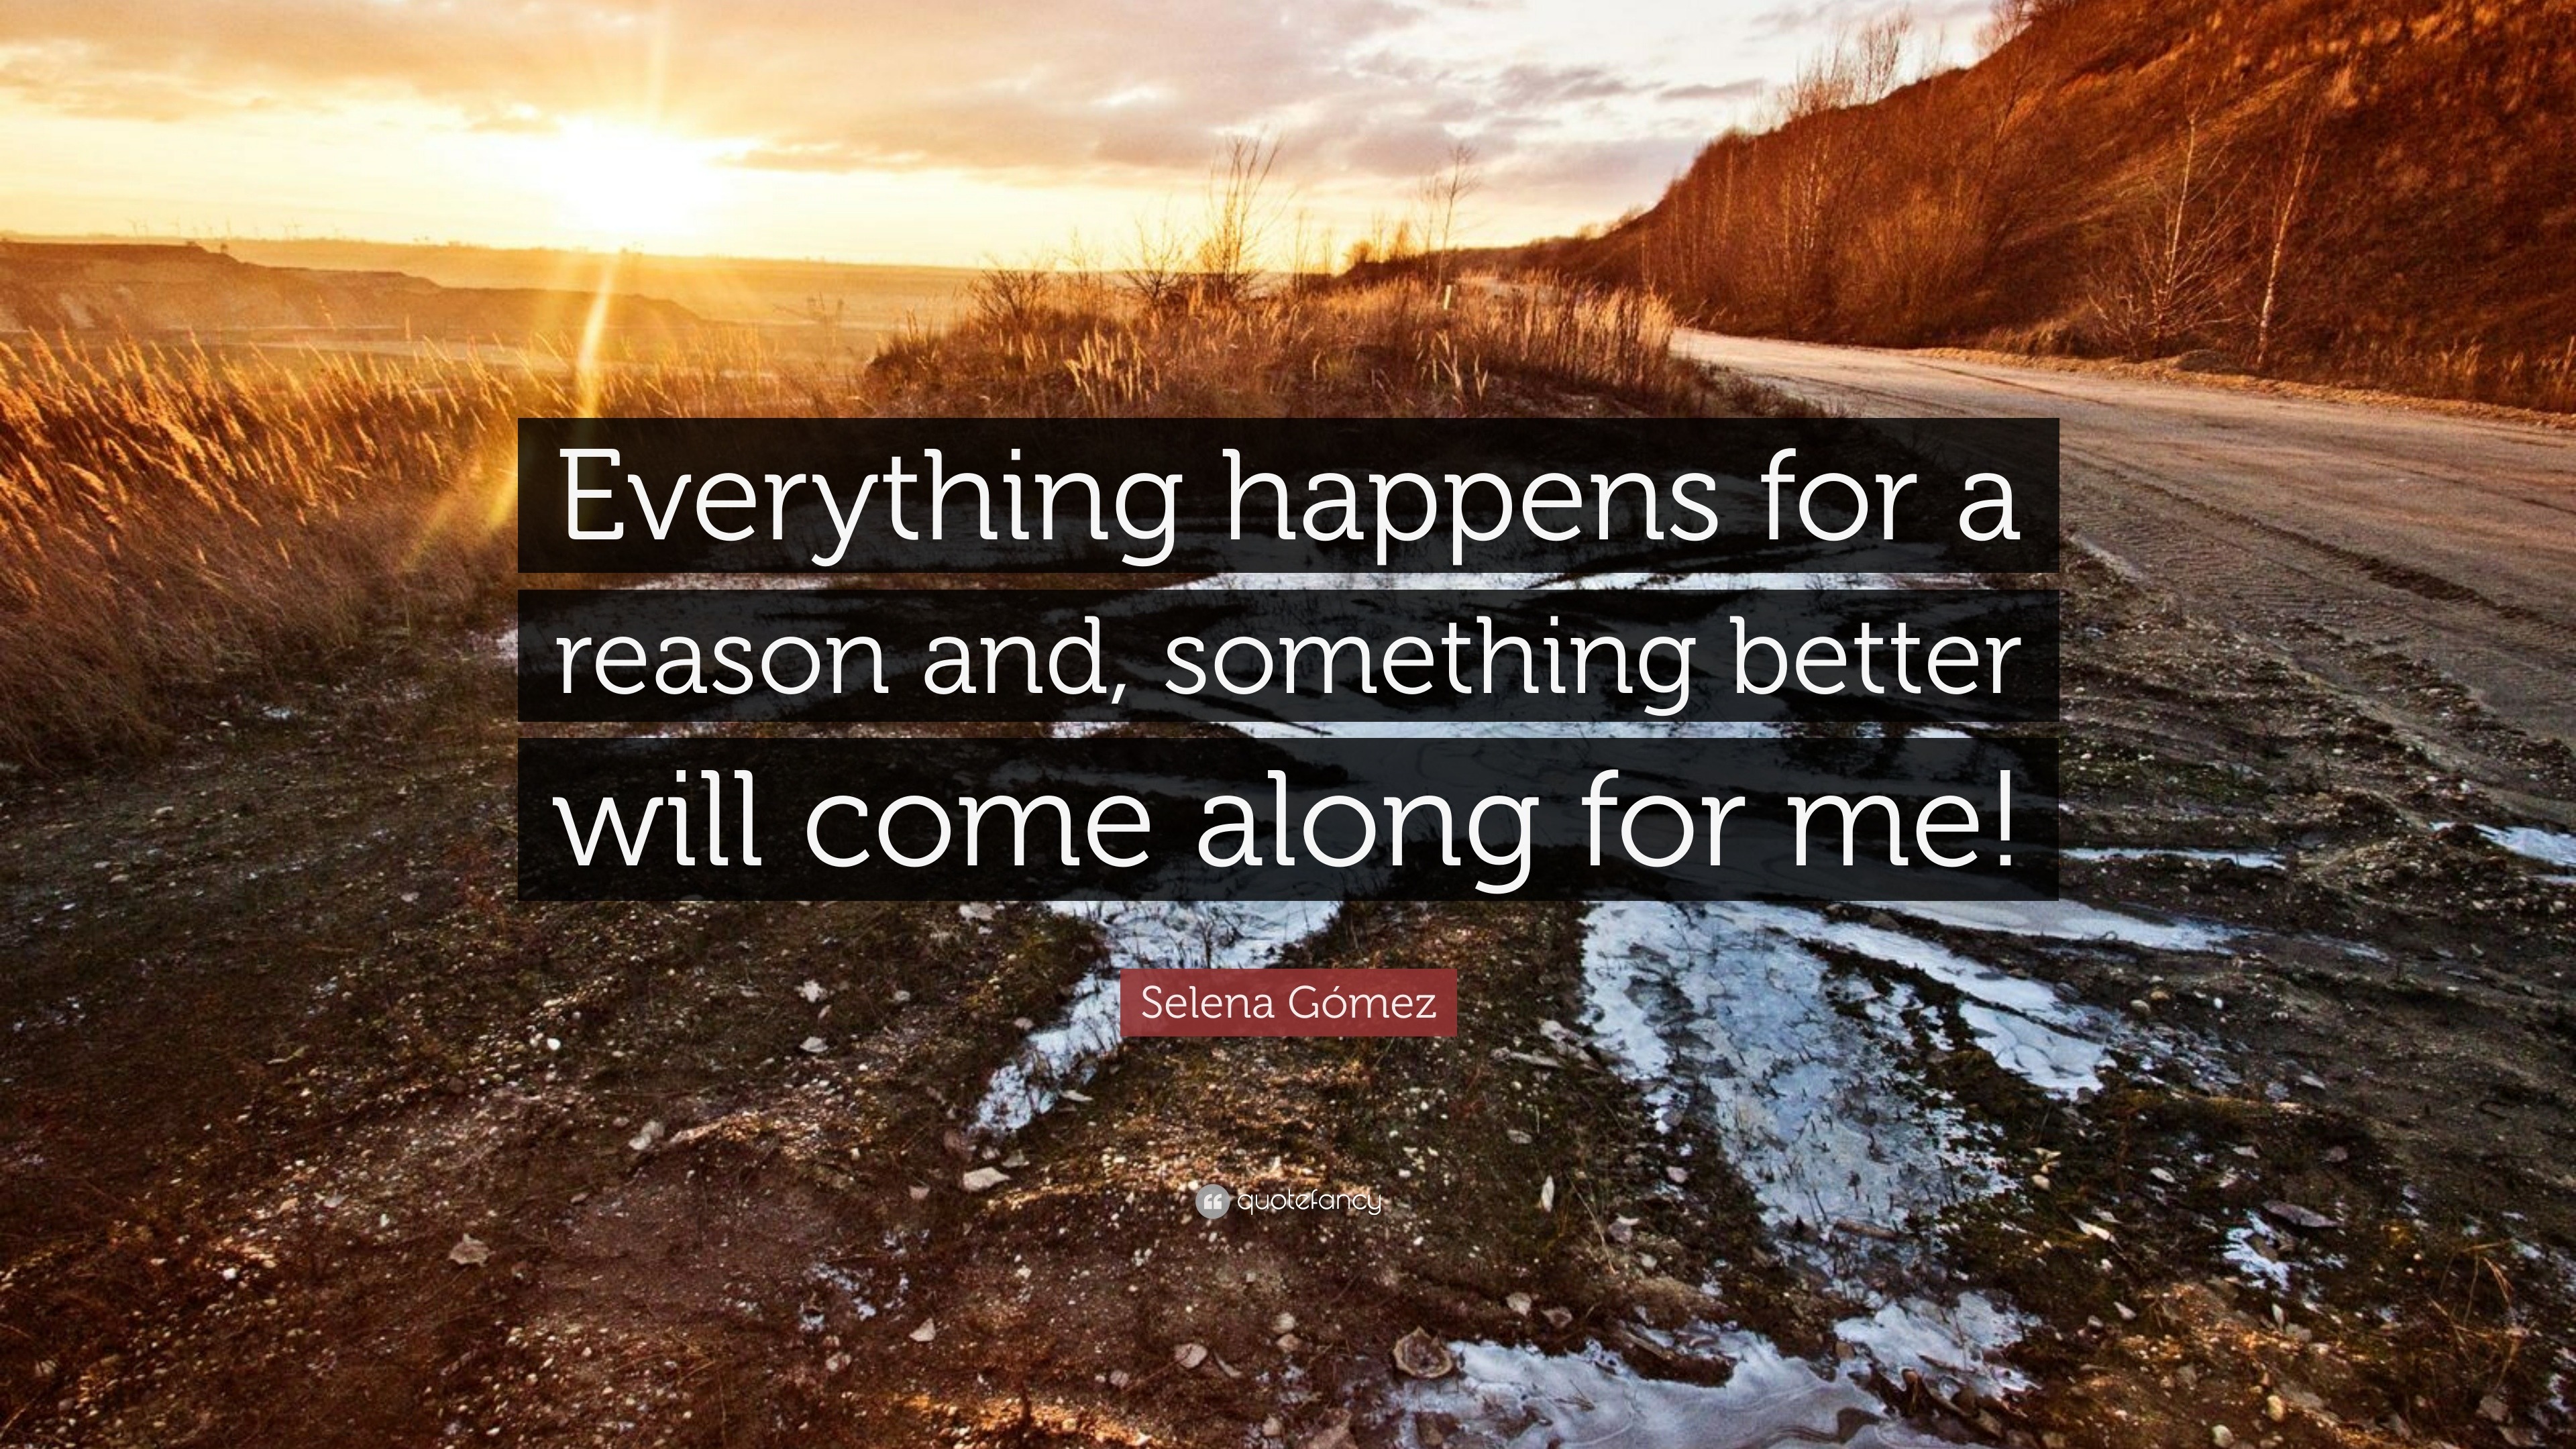 Selena Gómez Quote: “Everything happens for a reason and, something